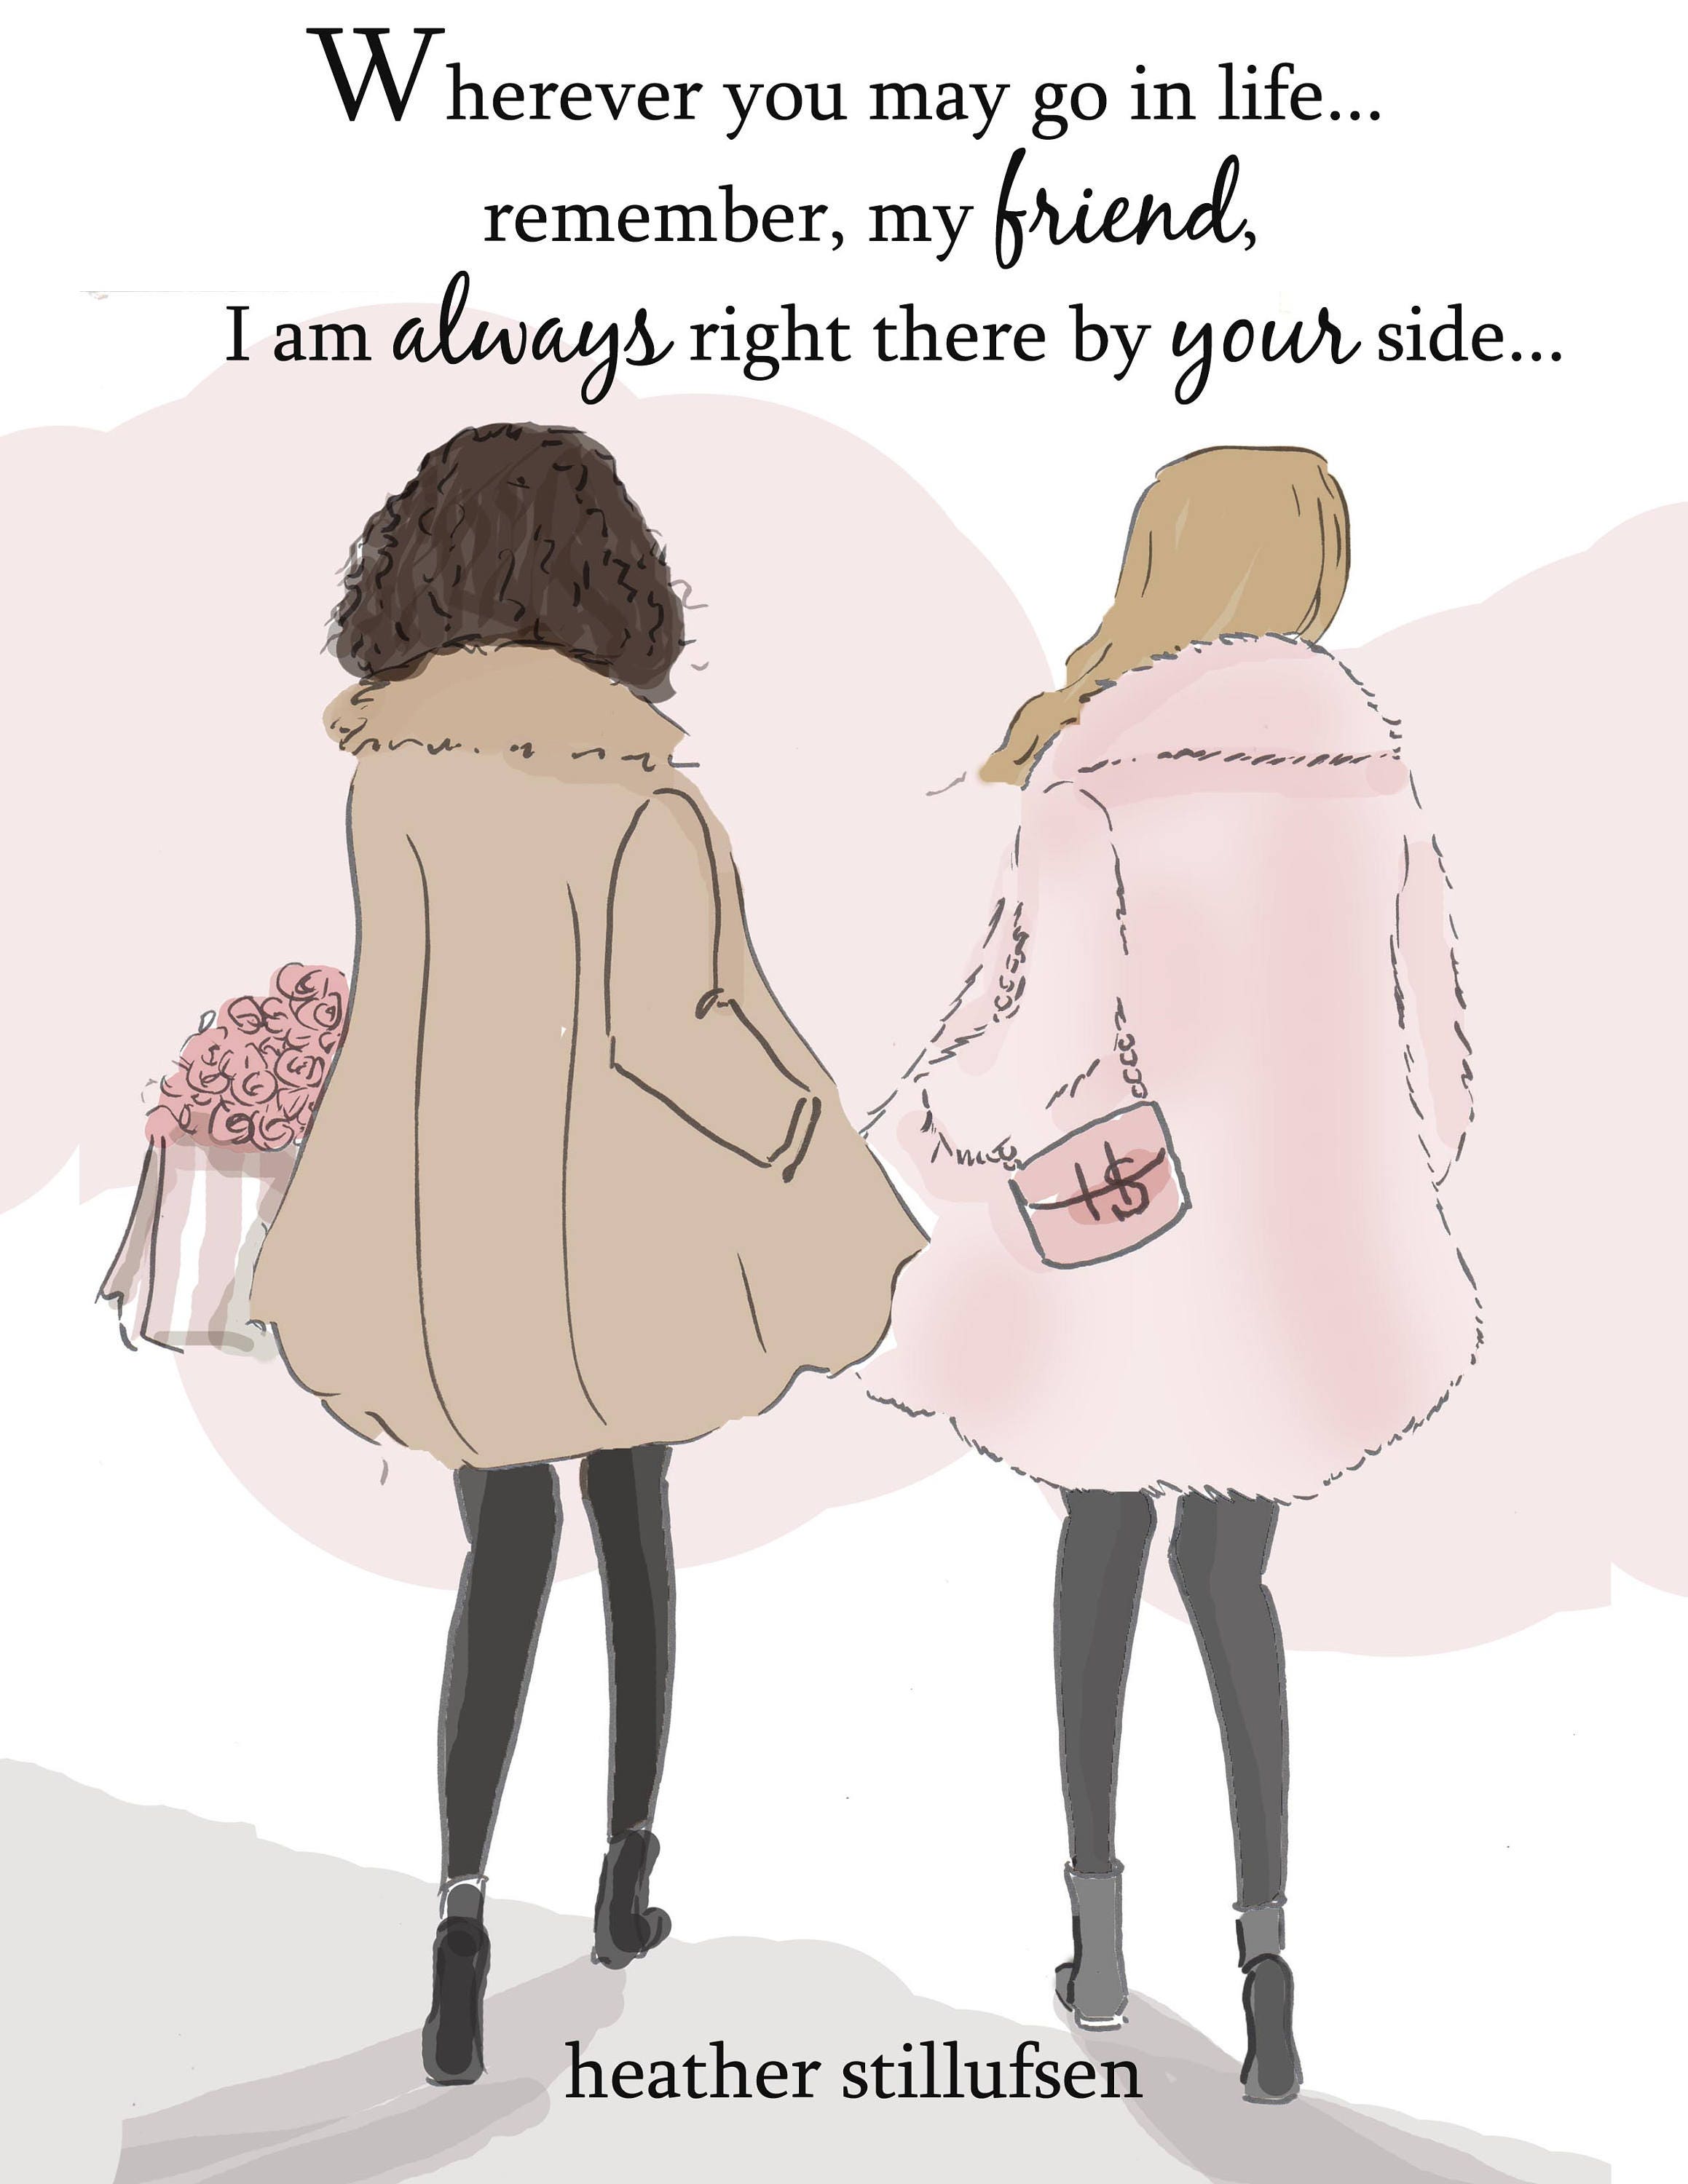 Best Friends Are Always by Your Side Art for Women Quotes - Etsy